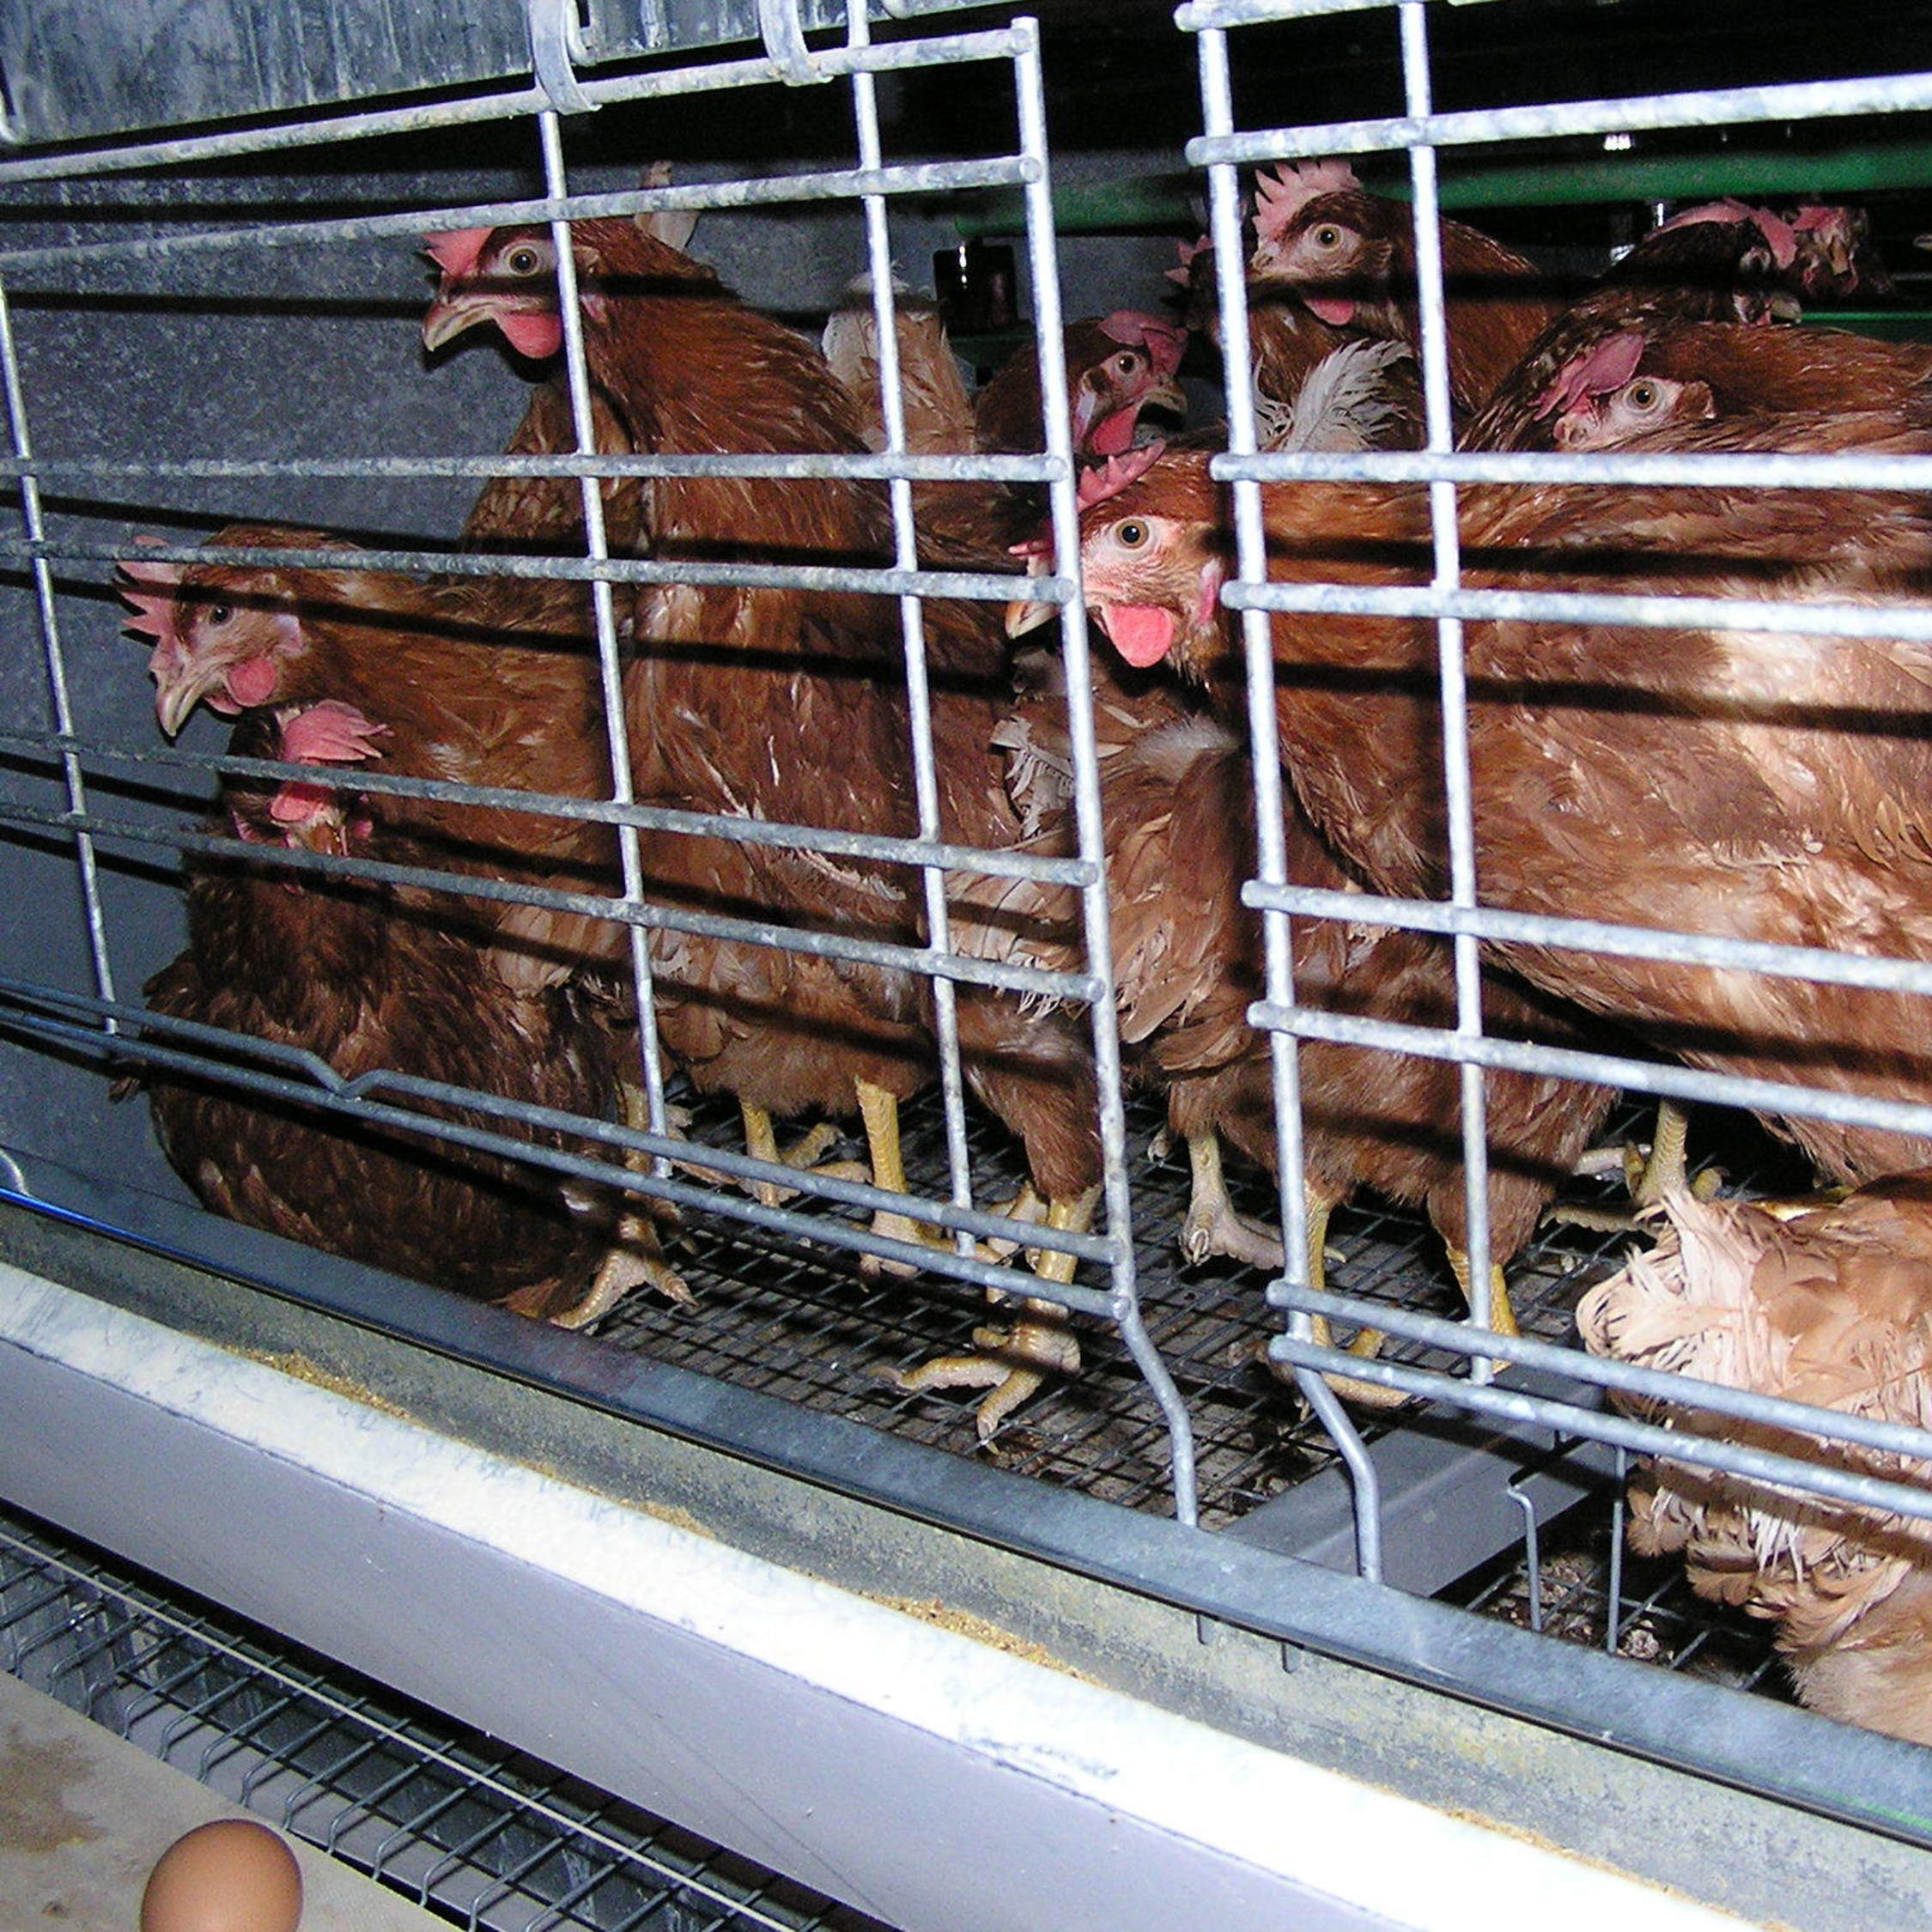 Laying hens in a small cage